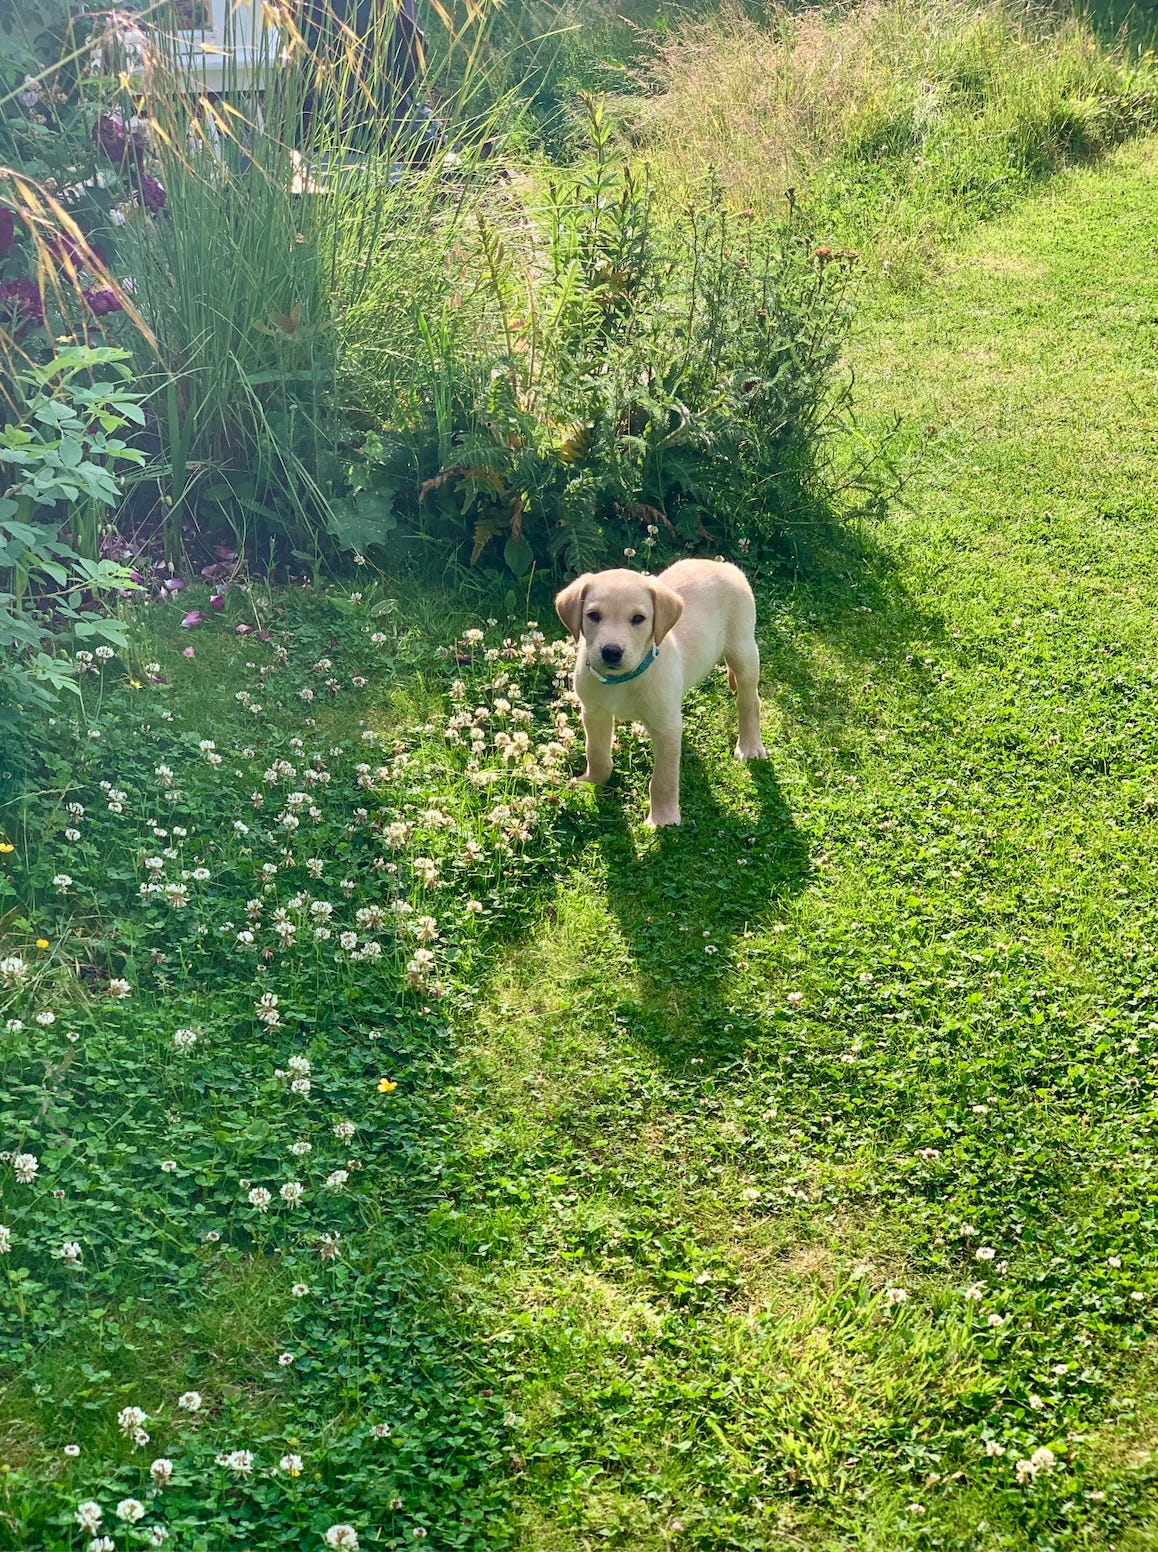 A yellow Labrador puppy standing in a garden with a clover lawn and long grass